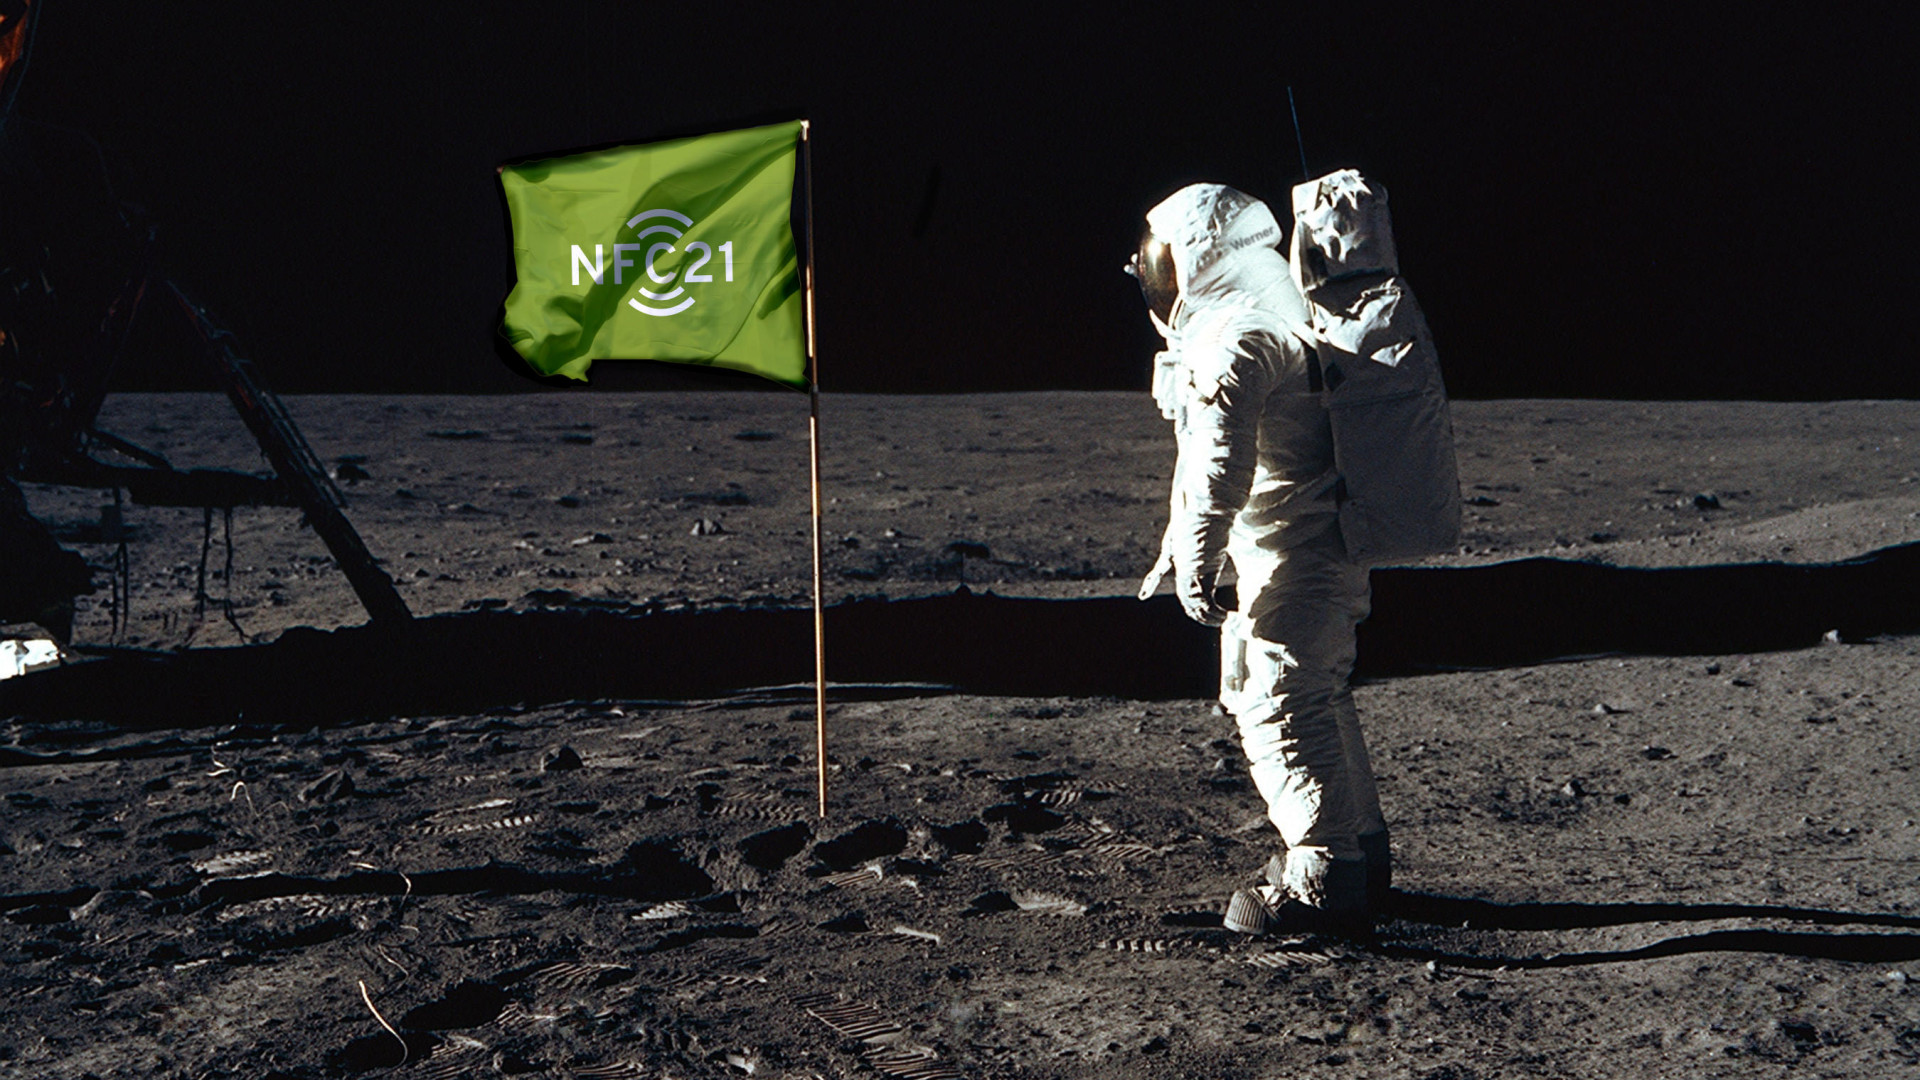 Vortrag: „That's one small step for an IT department, one giant leap for the company"